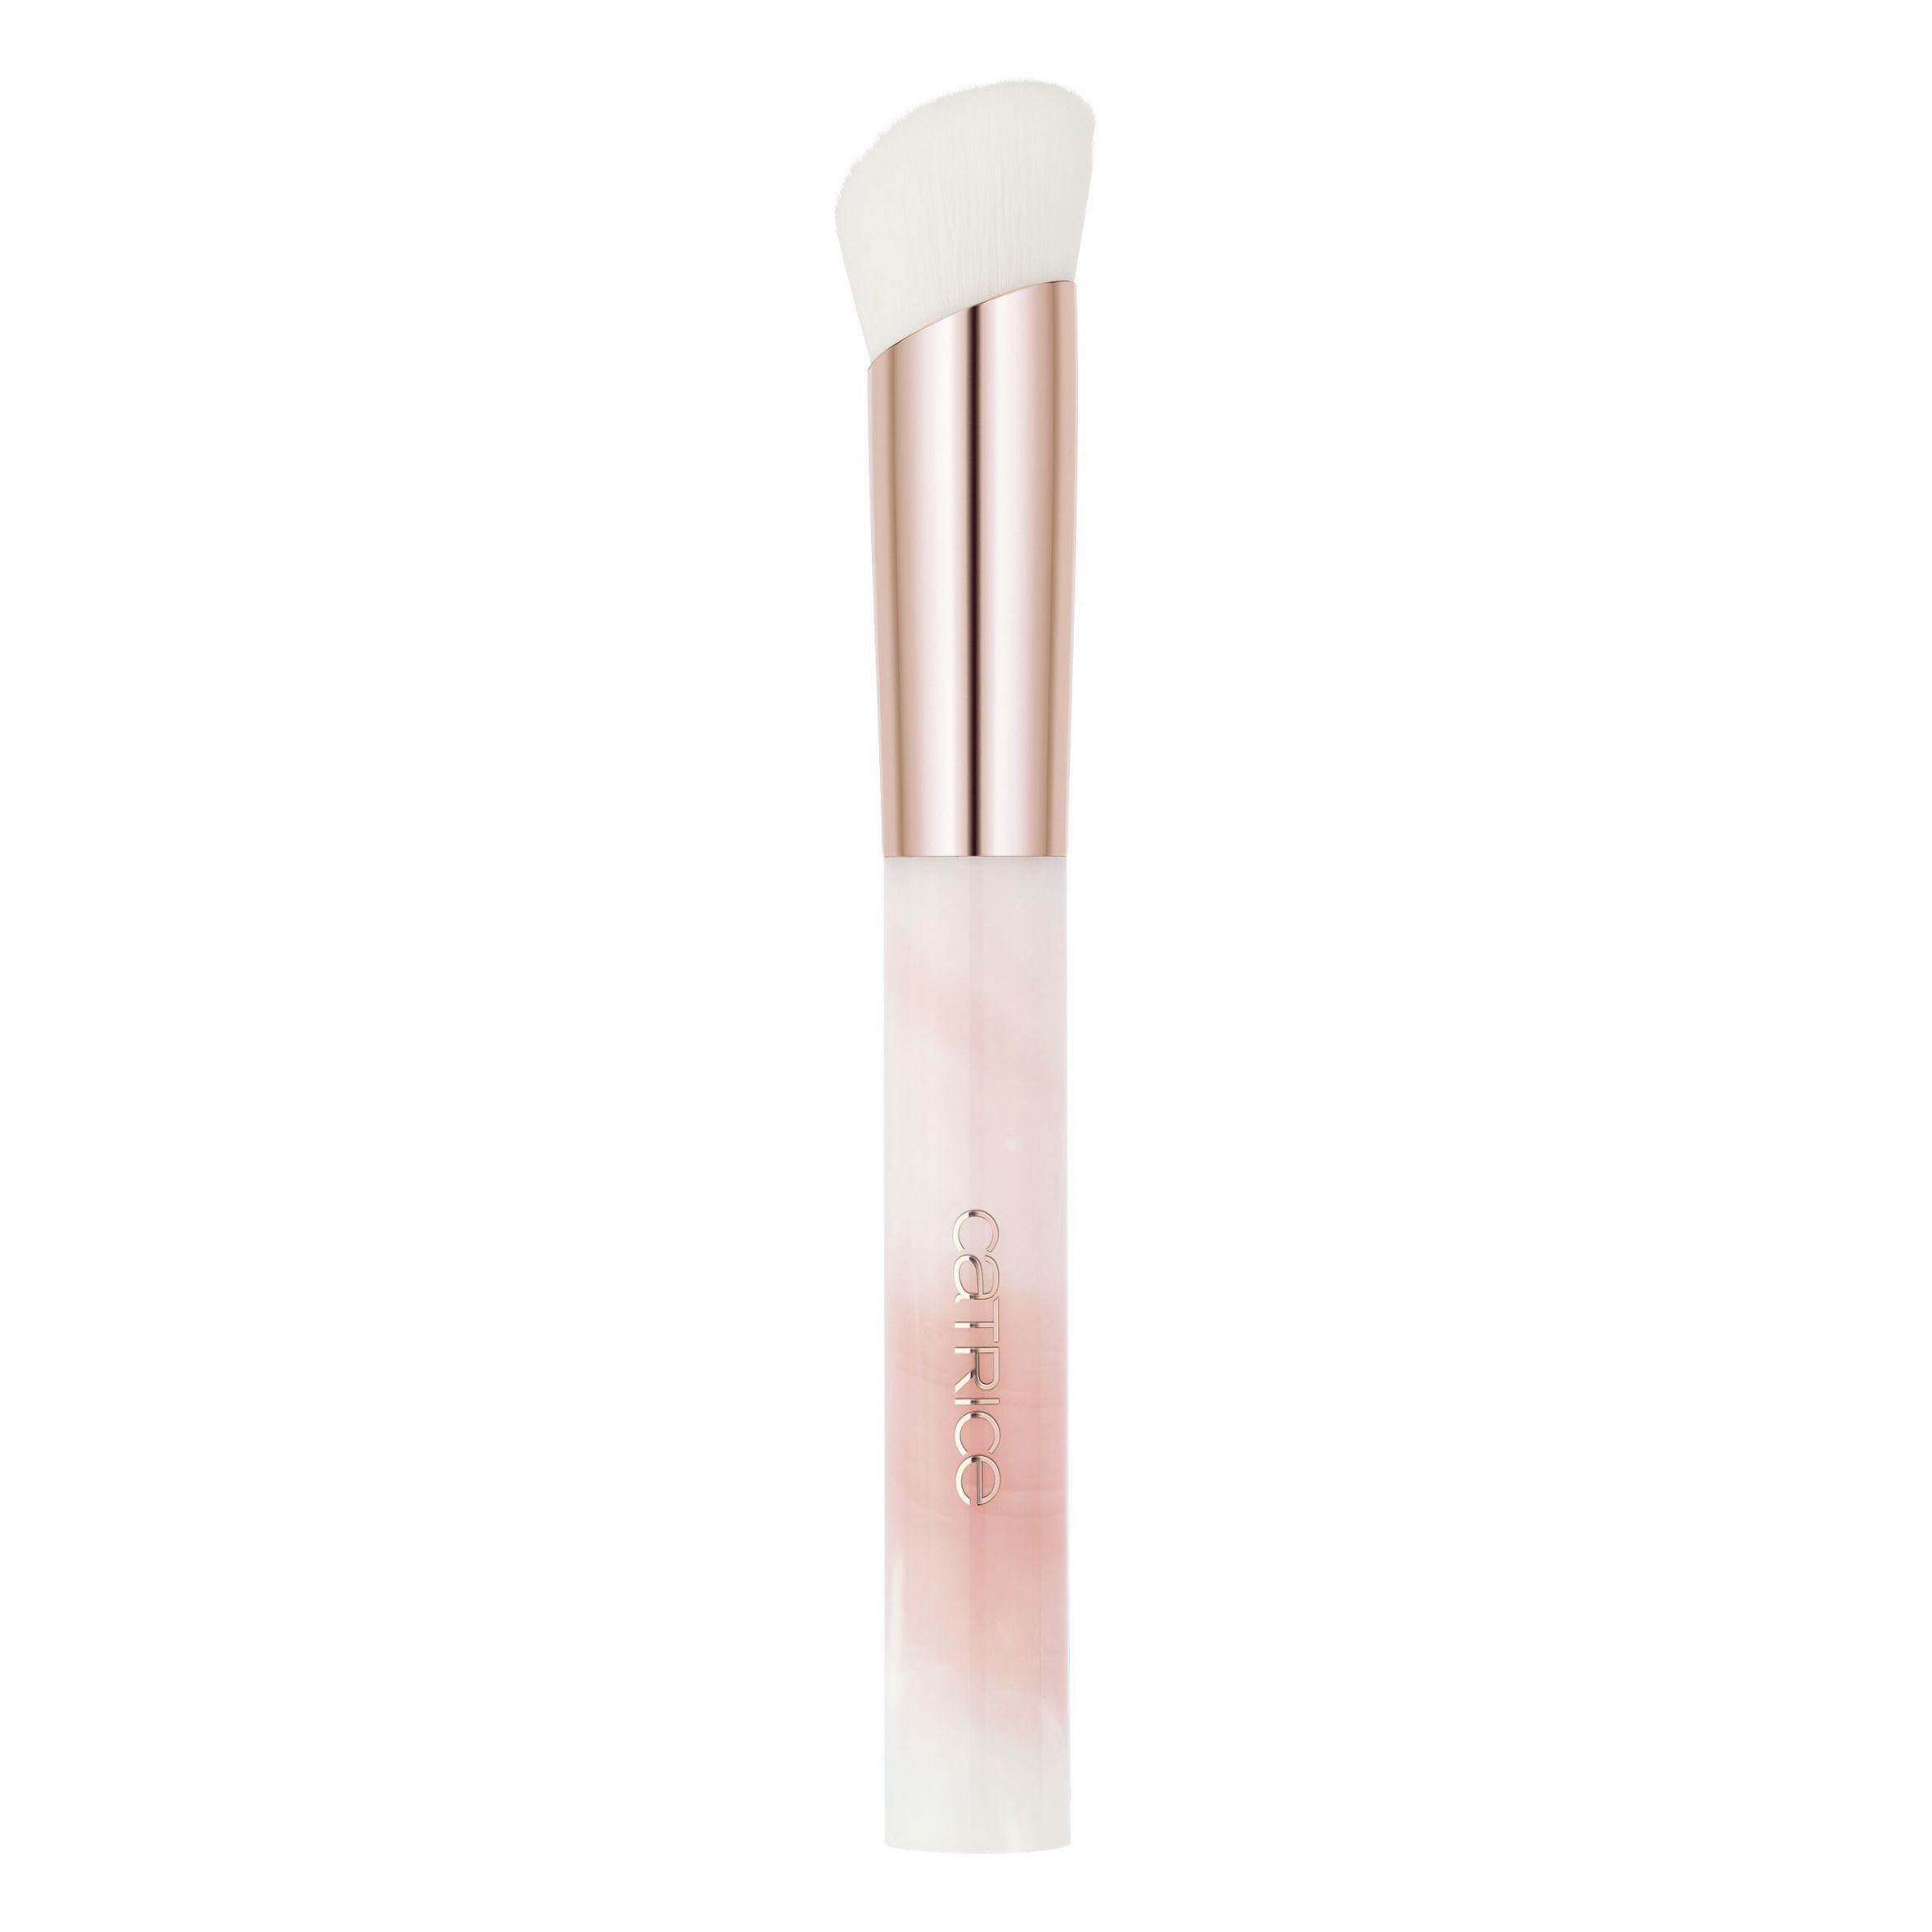 Foundation-Pinsel - It Pieces Even Better - Make-Up Brush